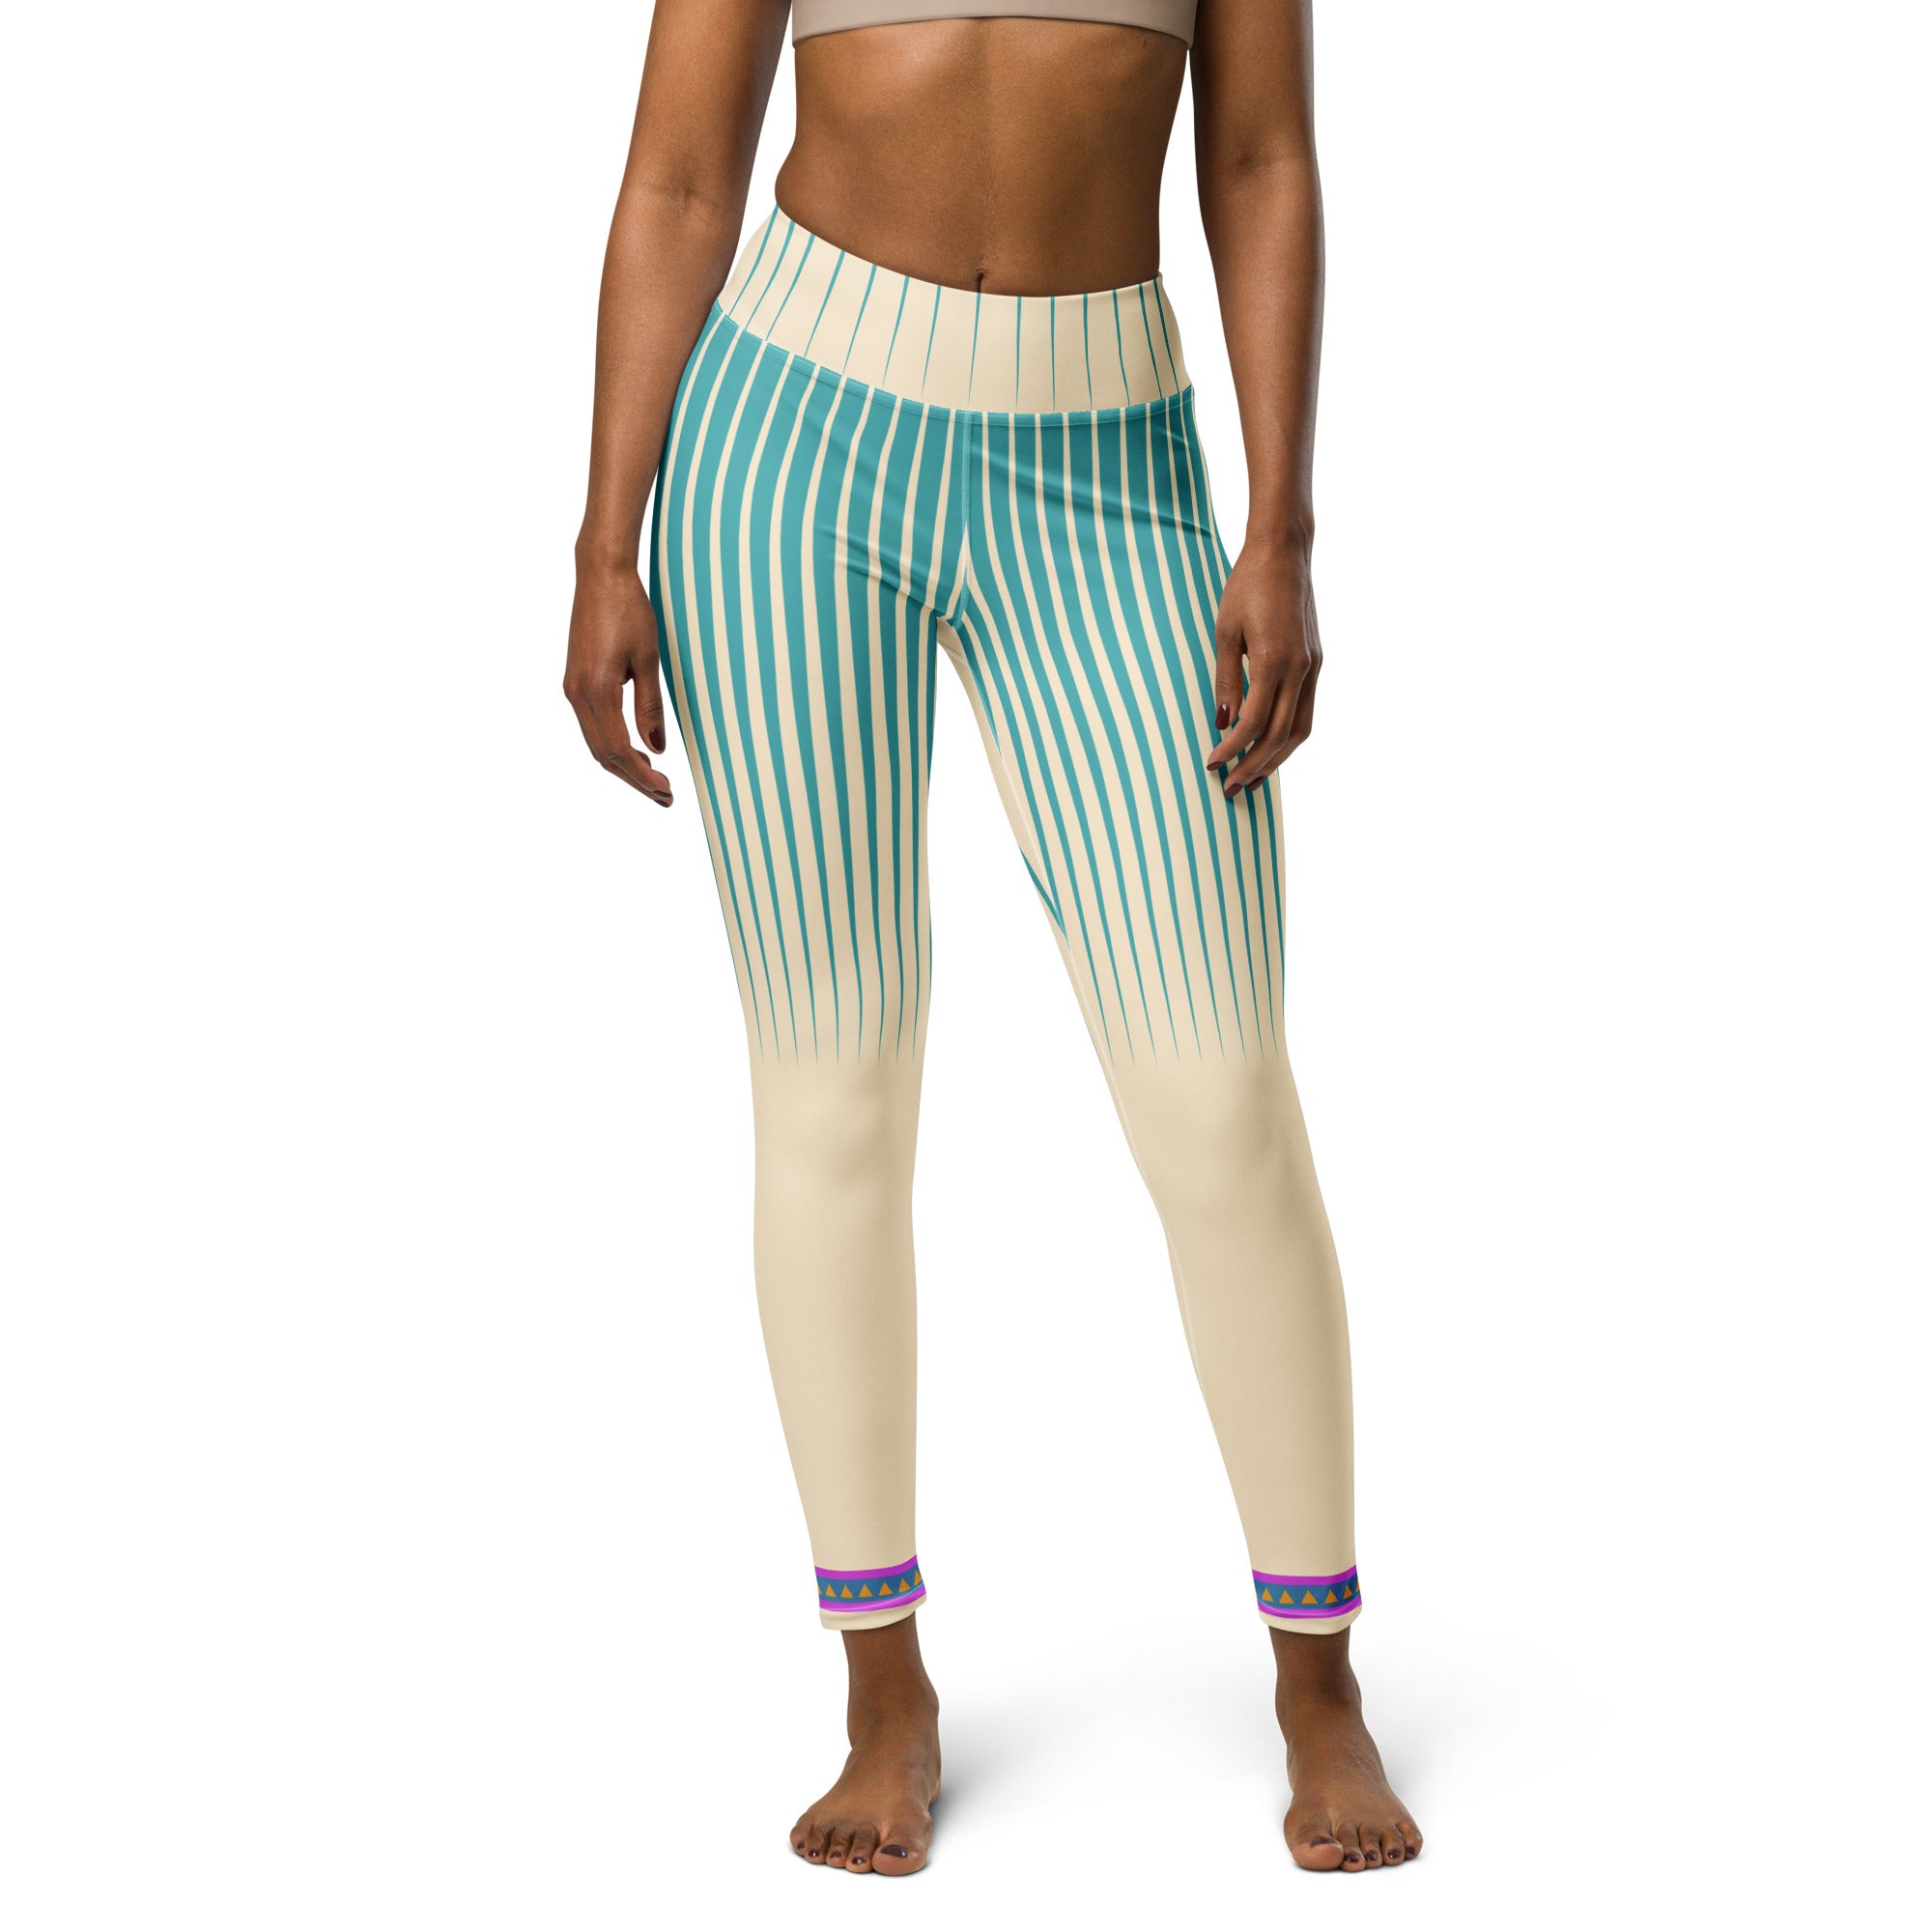 Celestite Circuits Yoga Leggings in action - perfect for any workout.